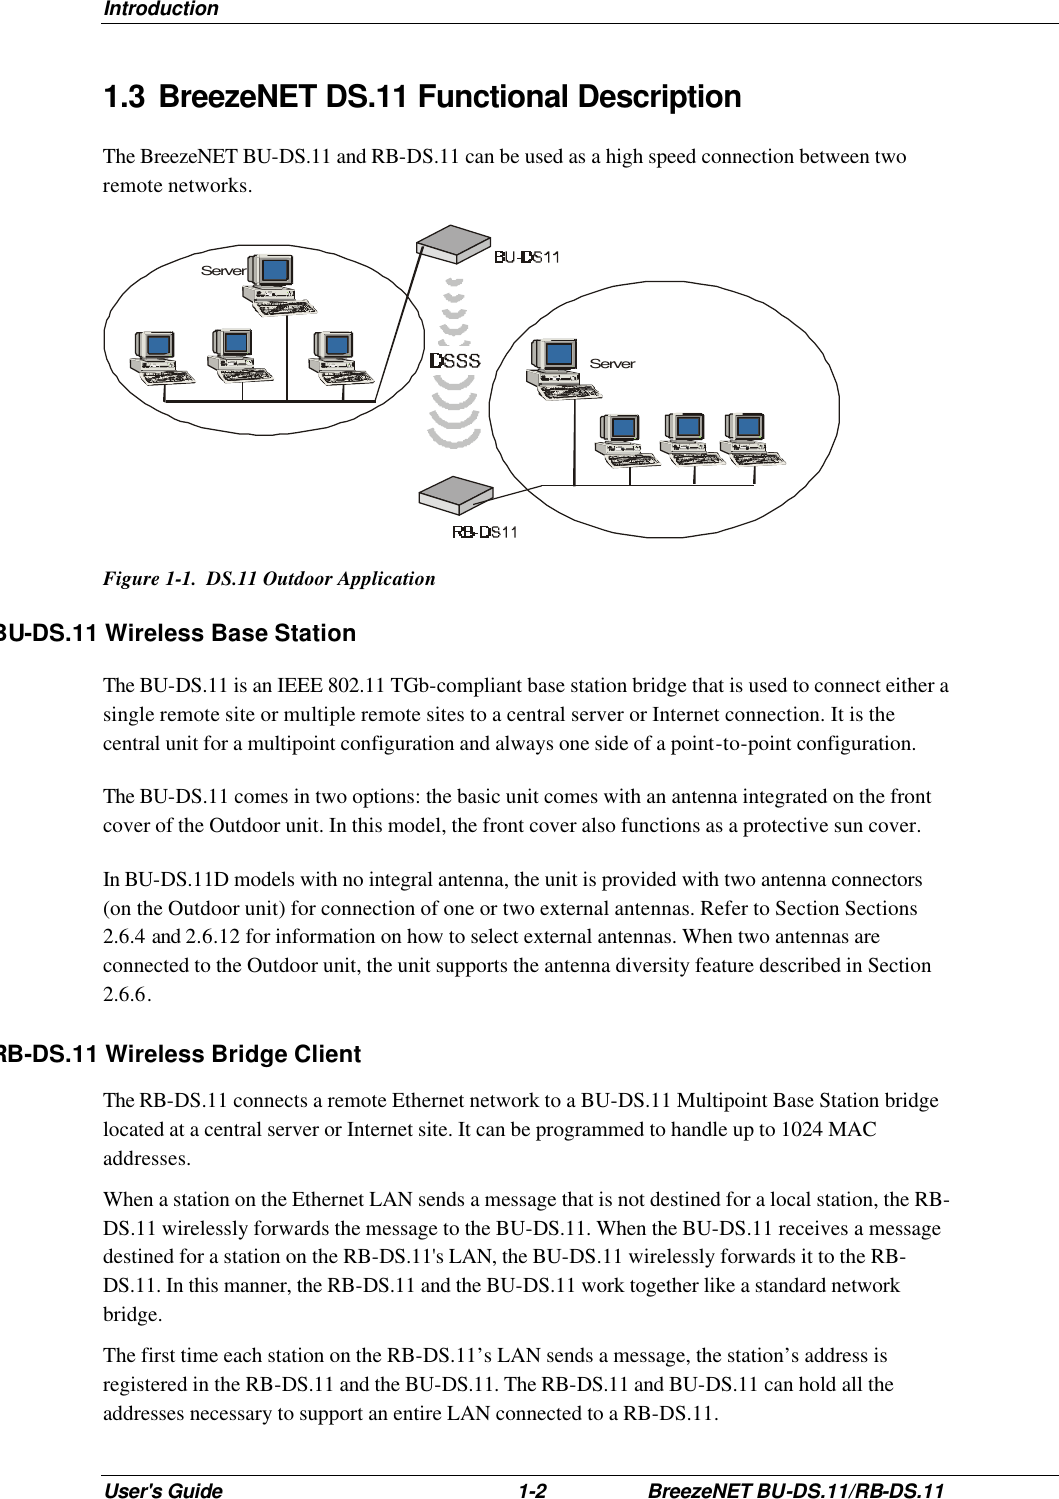 Introduction User&apos;s Guide 1-2 BreezeNET BU-DS.11/RB-DS.11 1.3 BreezeNET DS.11 Functional Description The BreezeNET BU-DS.11 and RB-DS.11 can be used as a high speed connection between two remote networks. ServerServer Figure 1-1.  DS.11 Outdoor Application BU-DS.11 Wireless Base Station The BU-DS.11 is an IEEE 802.11 TGb-compliant base station bridge that is used to connect either a single remote site or multiple remote sites to a central server or Internet connection. It is the central unit for a multipoint configuration and always one side of a point-to-point configuration. The BU-DS.11 comes in two options: the basic unit comes with an antenna integrated on the front cover of the Outdoor unit. In this model, the front cover also functions as a protective sun cover. In BU-DS.11D models with no integral antenna, the unit is provided with two antenna connectors (on the Outdoor unit) for connection of one or two external antennas. Refer to Section Sections 2.6.4 and 2.6.12 for information on how to select external antennas. When two antennas are connected to the Outdoor unit, the unit supports the antenna diversity feature described in Section 2.6.6. RB-DS.11 Wireless Bridge Client The RB-DS.11 connects a remote Ethernet network to a BU-DS.11 Multipoint Base Station bridge located at a central server or Internet site. It can be programmed to handle up to 1024 MAC addresses. When a station on the Ethernet LAN sends a message that is not destined for a local station, the RB-DS.11 wirelessly forwards the message to the BU-DS.11. When the BU-DS.11 receives a message destined for a station on the RB-DS.11&apos;s LAN, the BU-DS.11 wirelessly forwards it to the RB-DS.11. In this manner, the RB-DS.11 and the BU-DS.11 work together like a standard network bridge. The first time each station on the RB-DS.11’s LAN sends a message, the station’s address is registered in the RB-DS.11 and the BU-DS.11. The RB-DS.11 and BU-DS.11 can hold all the addresses necessary to support an entire LAN connected to a RB-DS.11. 